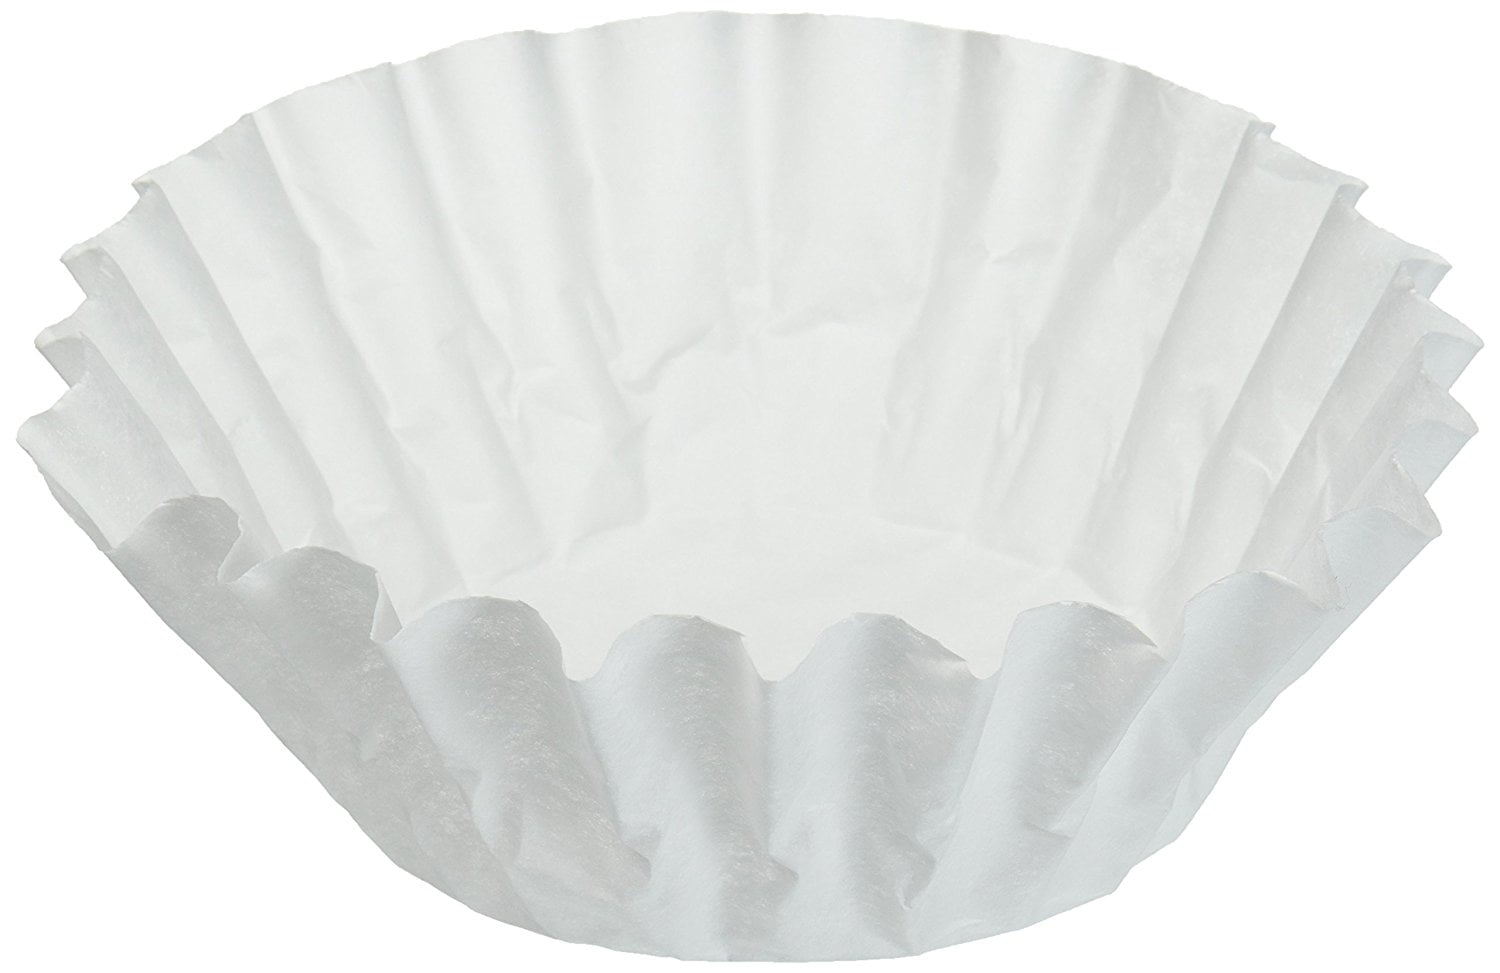 6-gallon Urn Style Bunn 6GAL20X8 Commercial Coffee Filters 252/carton 